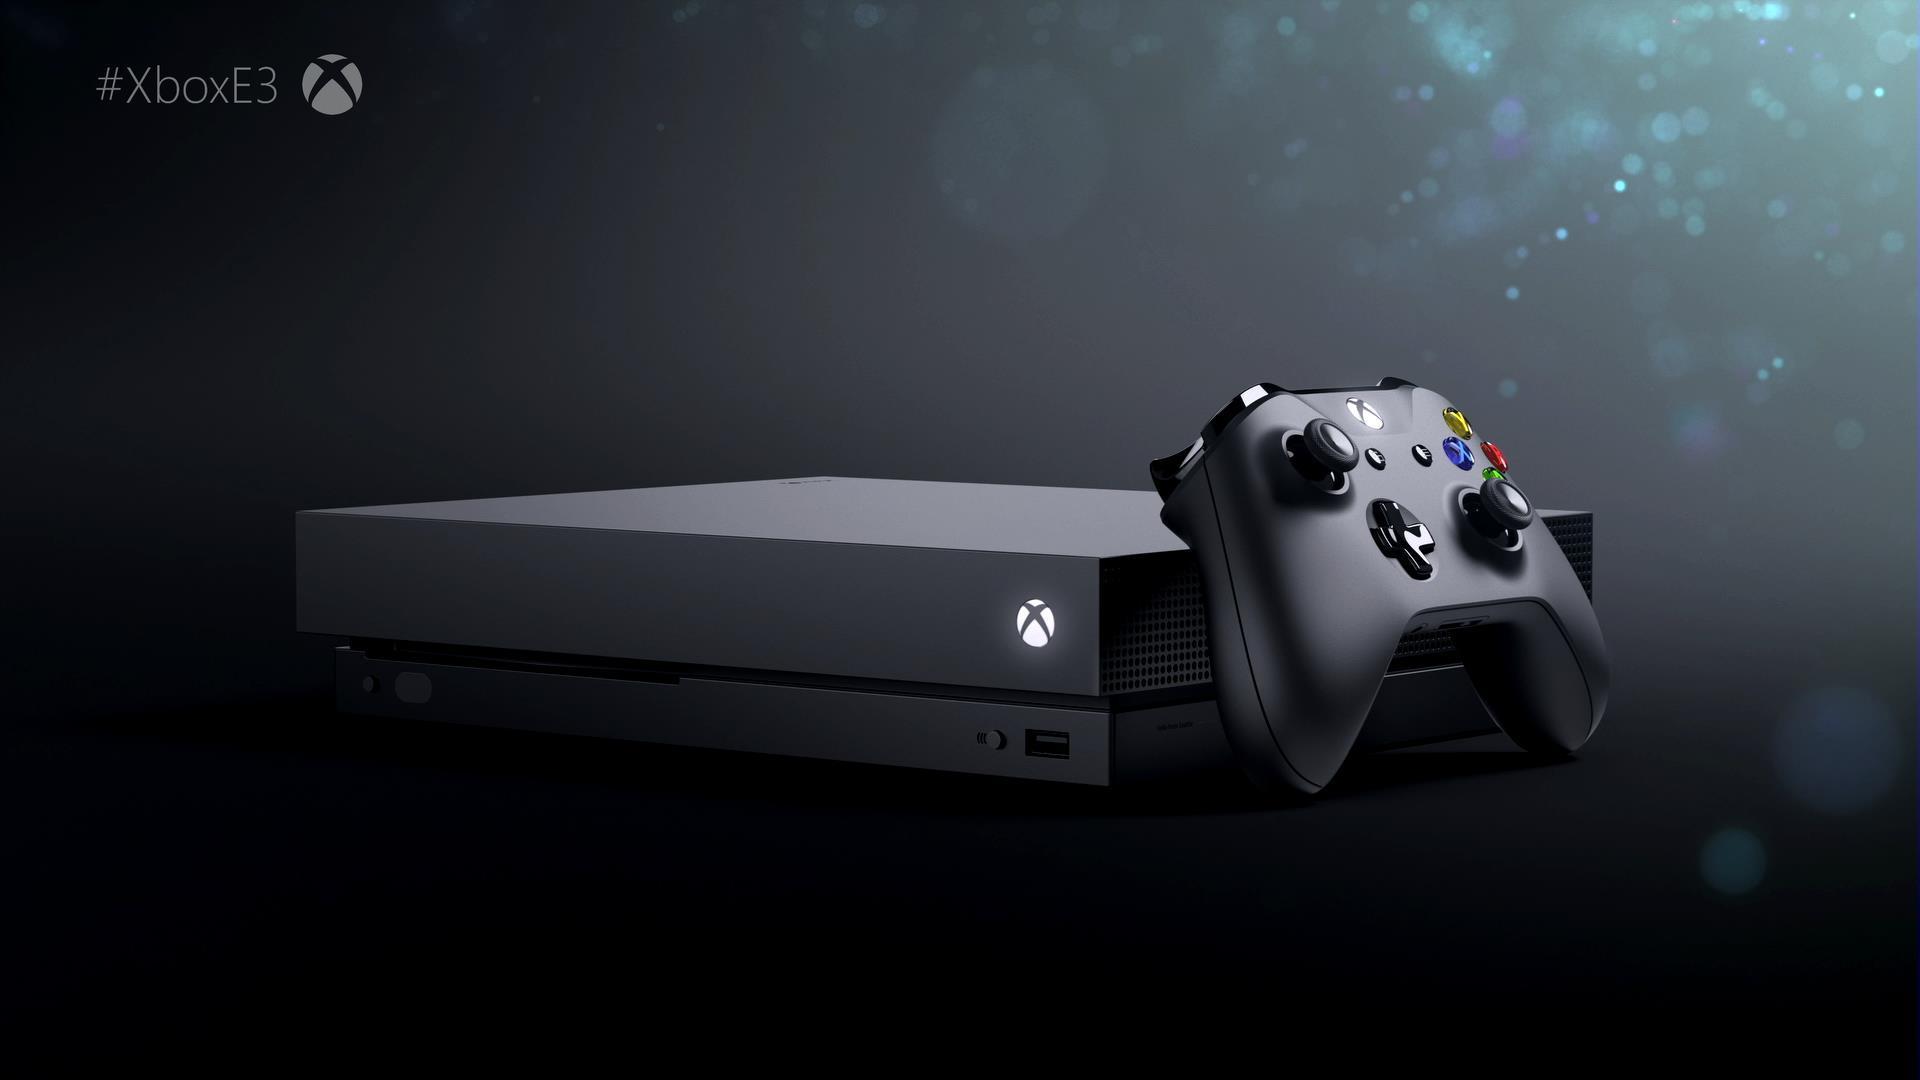 Prepare yourself for Xbox One X with these tips